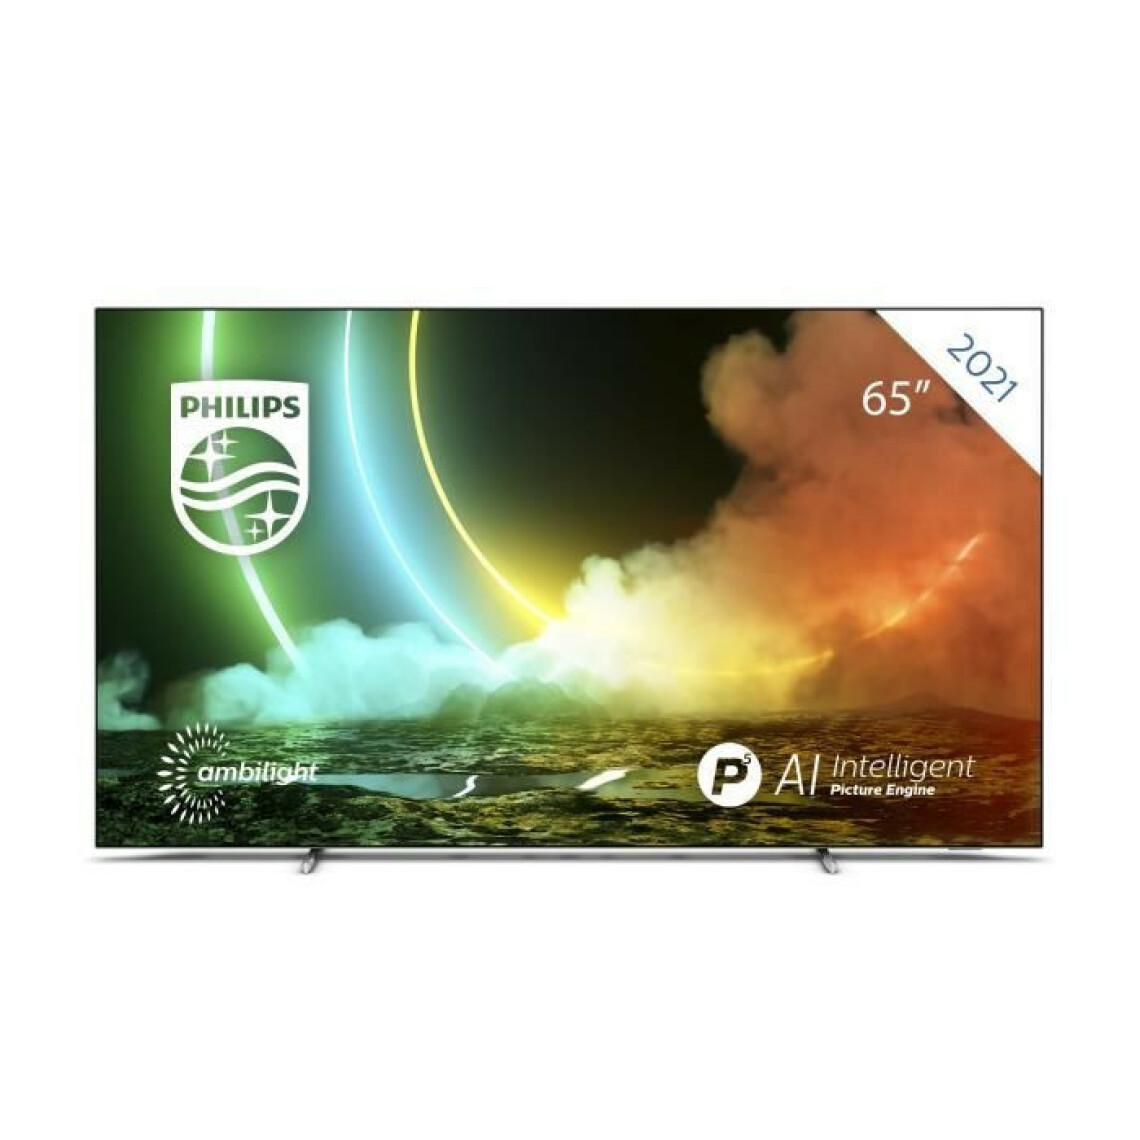 Philips - PHILIPS 65OLED706 - TV UHD 4K 65 164cm - Ambilight 3 cotes - Android TV - Dolby Atmos - 4xHDMI, 3xUSB - Cadre metallique - TV 56'' à 65''